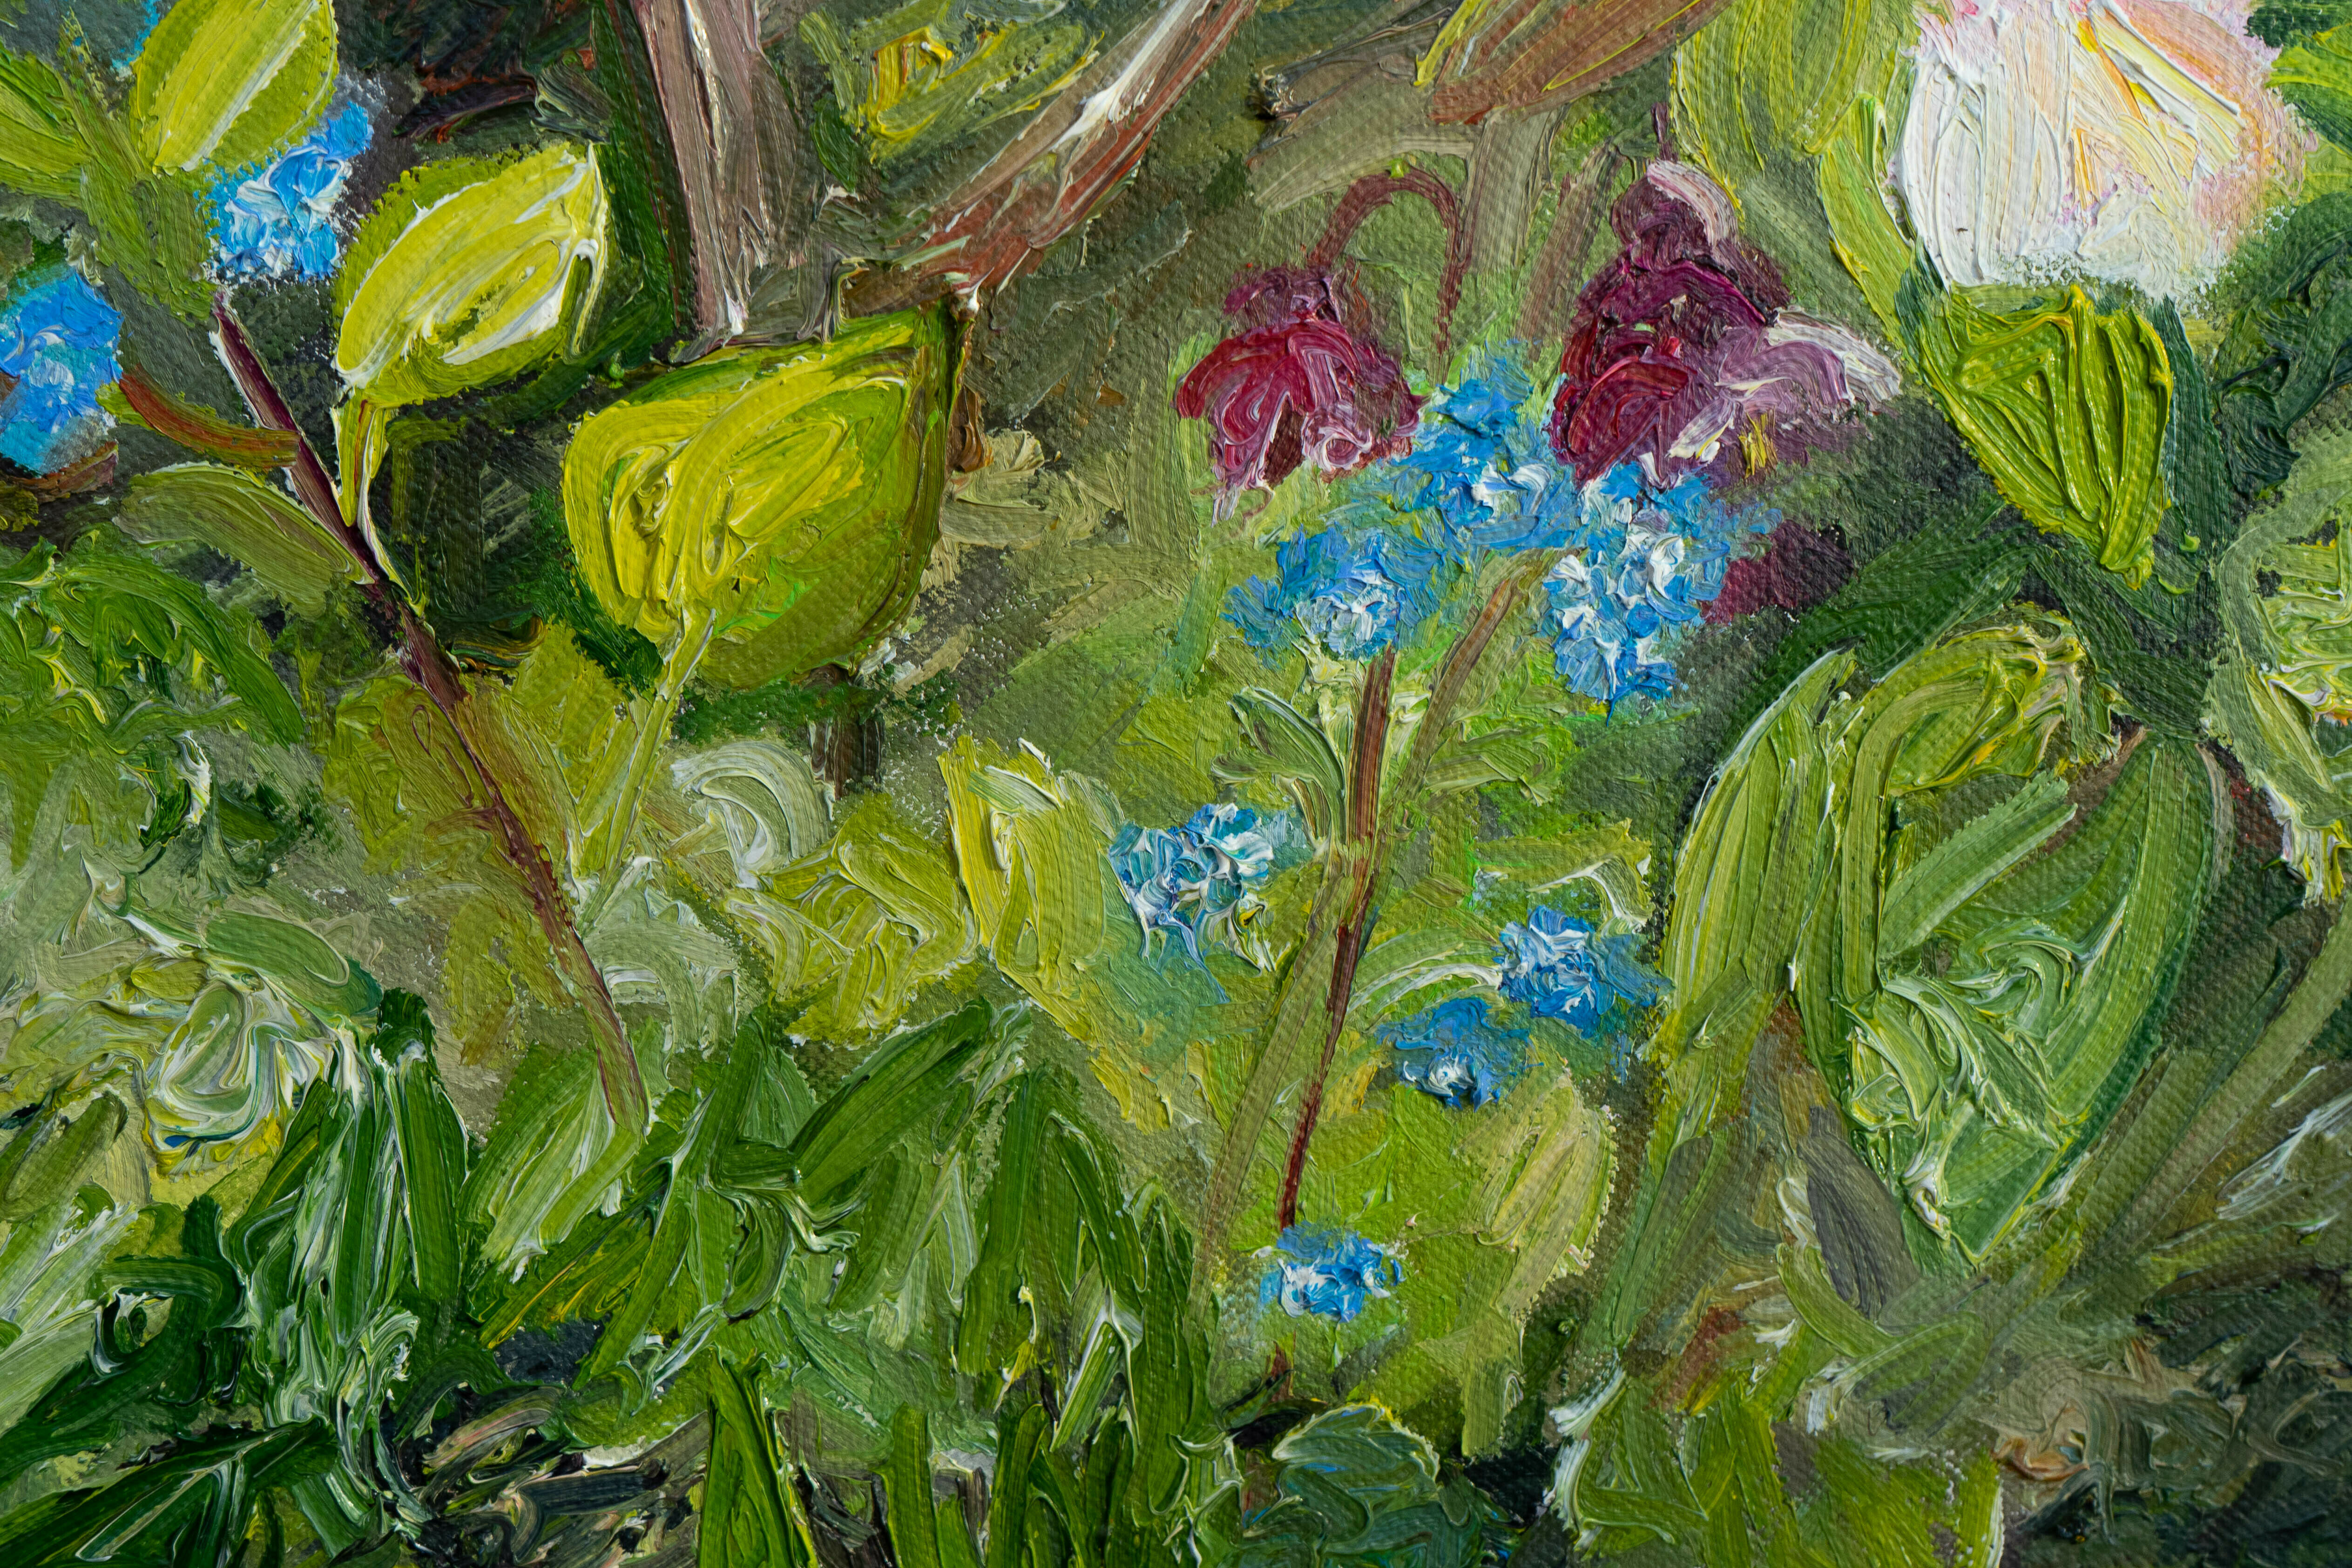 Picture "Rhododendron with perennial forget-me-not" (2012)